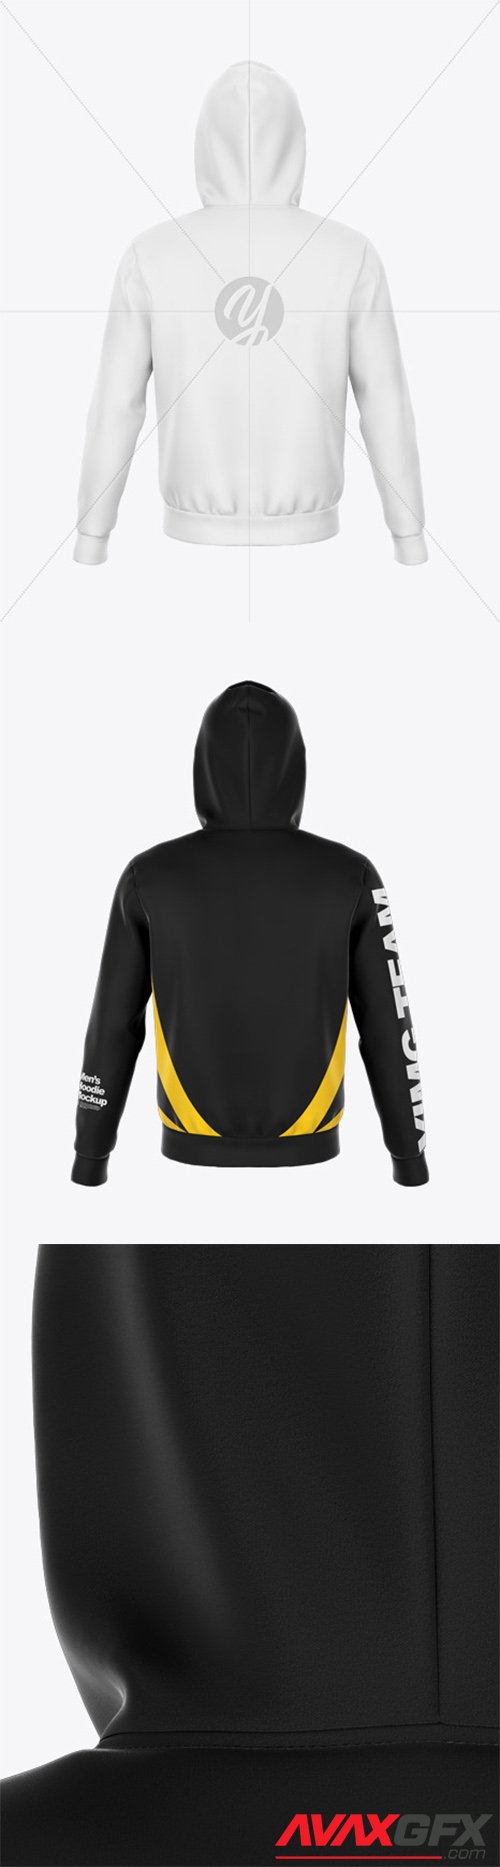 Download Hoodie Mockup - Back View 47625 » AVAXGFX - All Downloads that You Need in One Place! Graphic ...